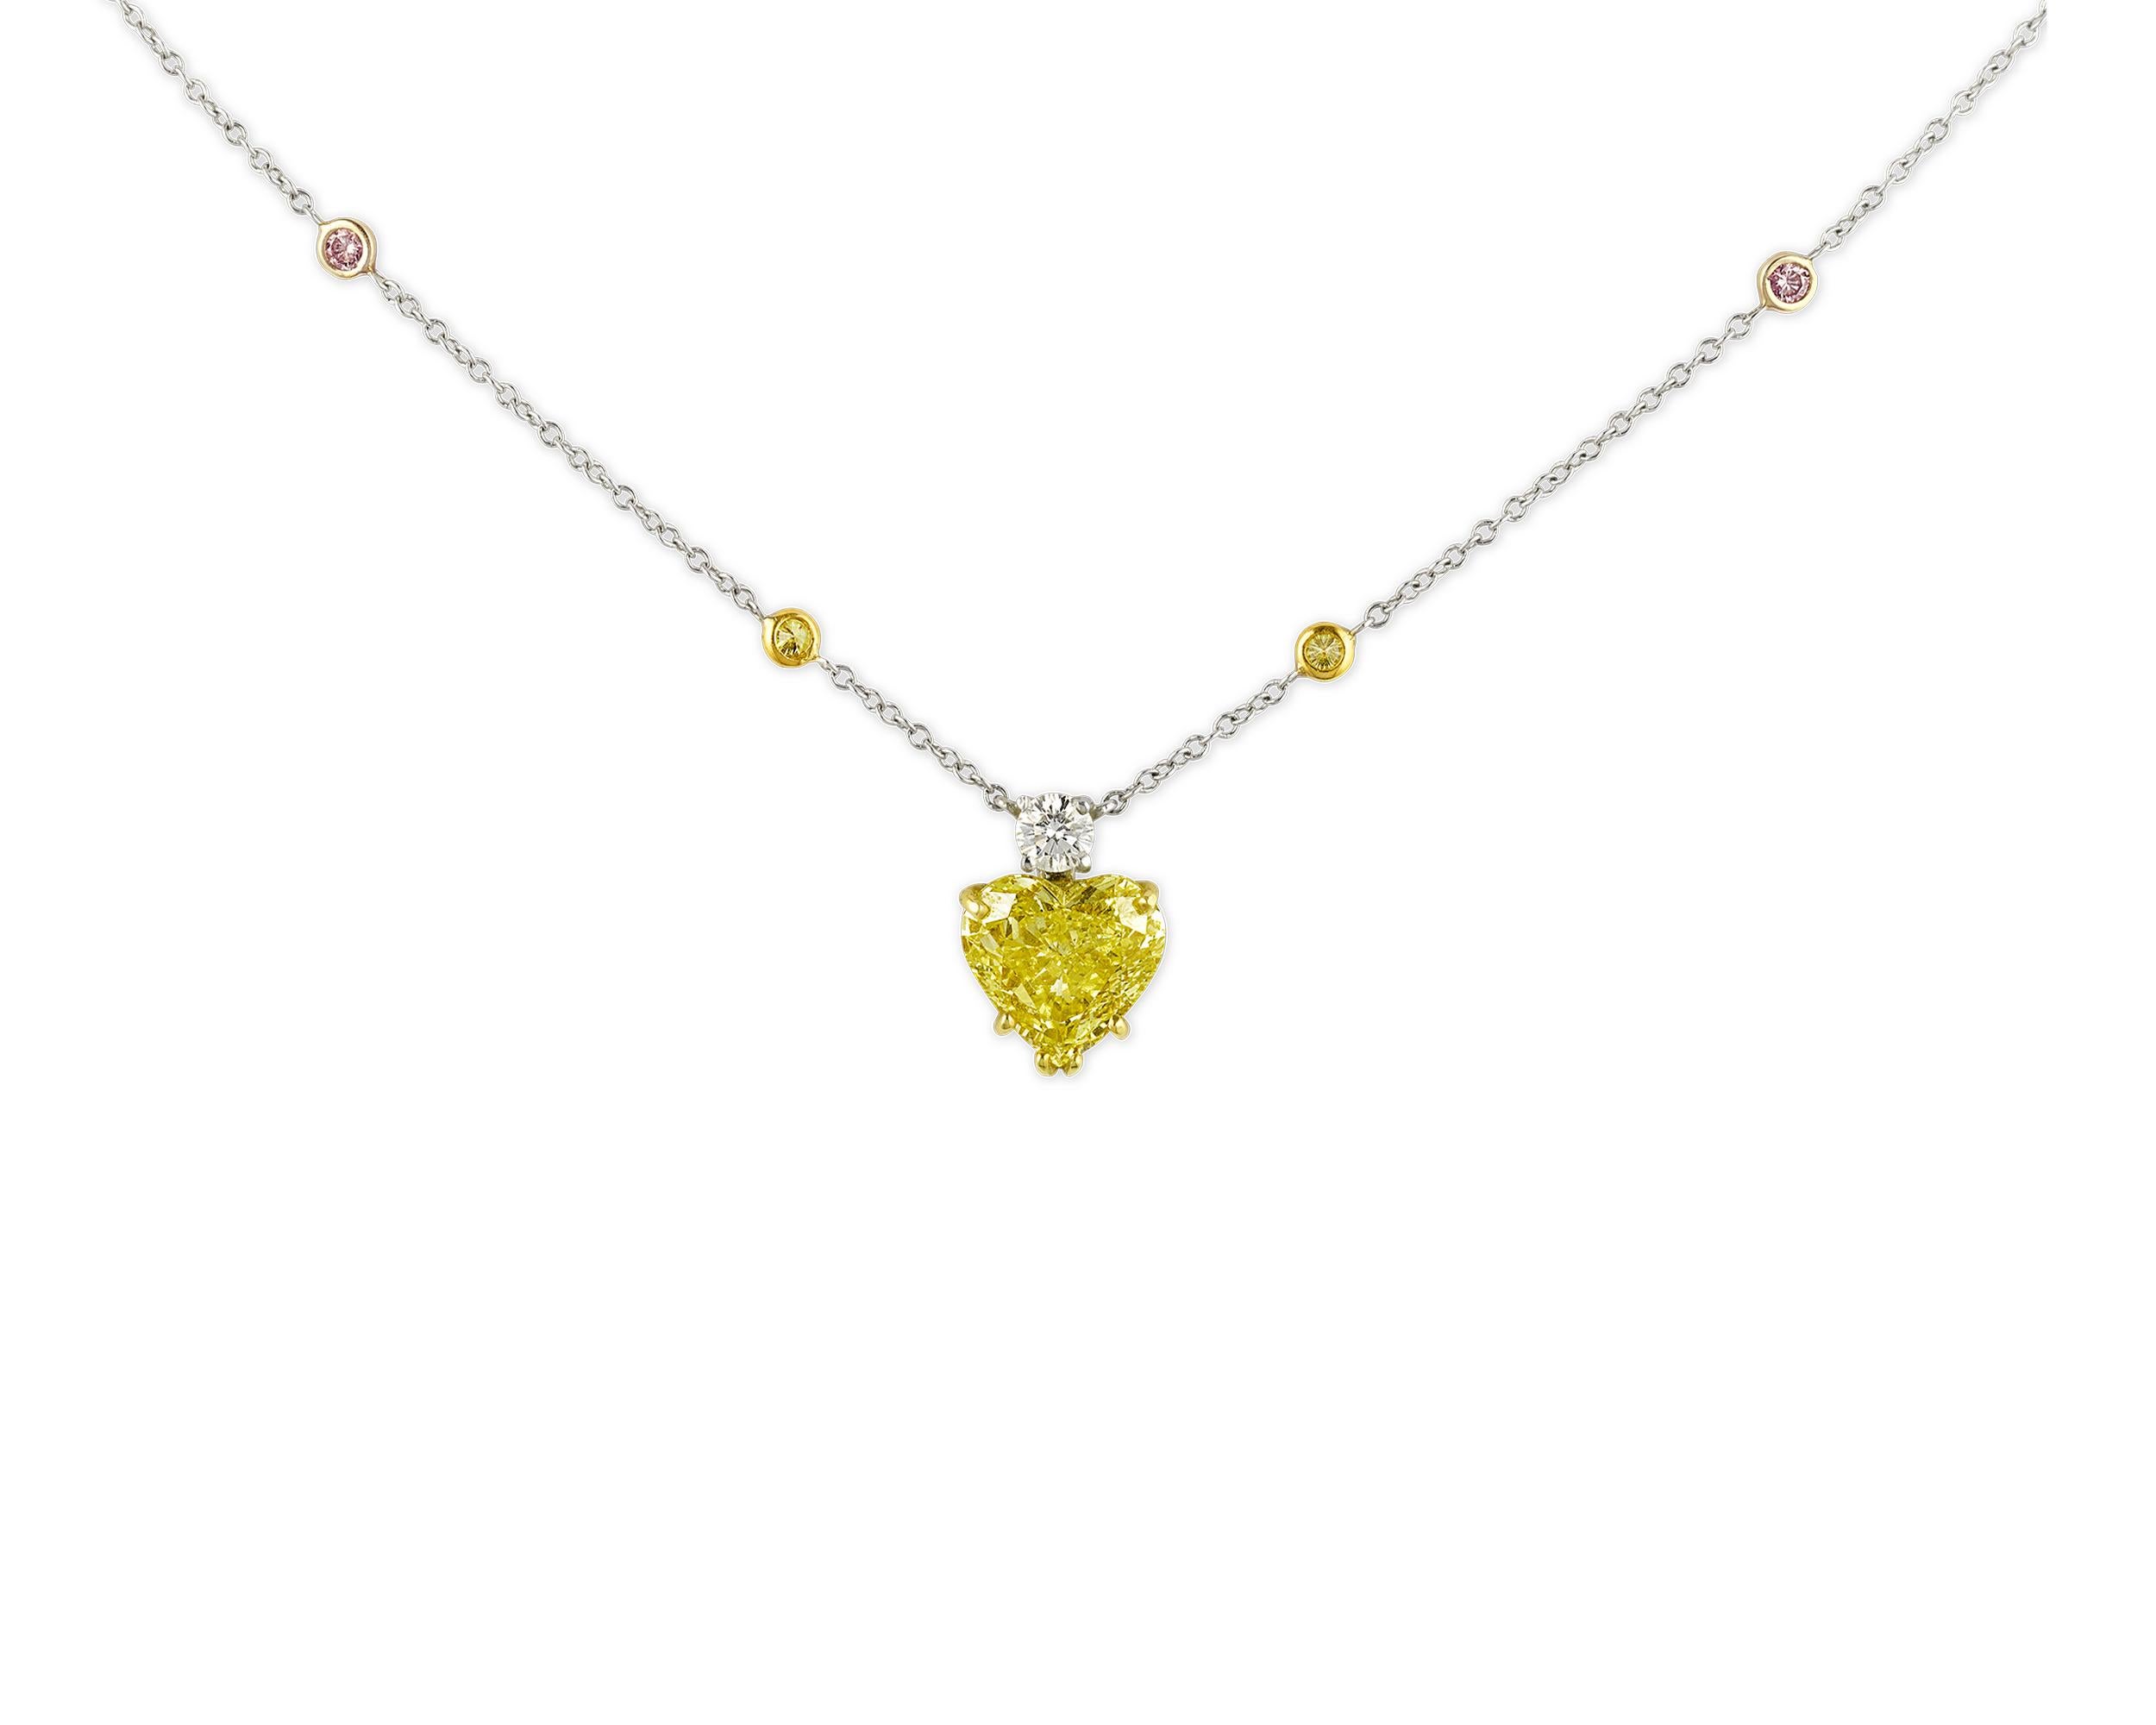 Feminine and romantic, this heart pendant is formed by a 2.42-carat fancy vivid yellow diamond. The remarkable colored diamond is certified by the Gemological Institute of America as being all-natural, with the impressive clarity grade of Internally